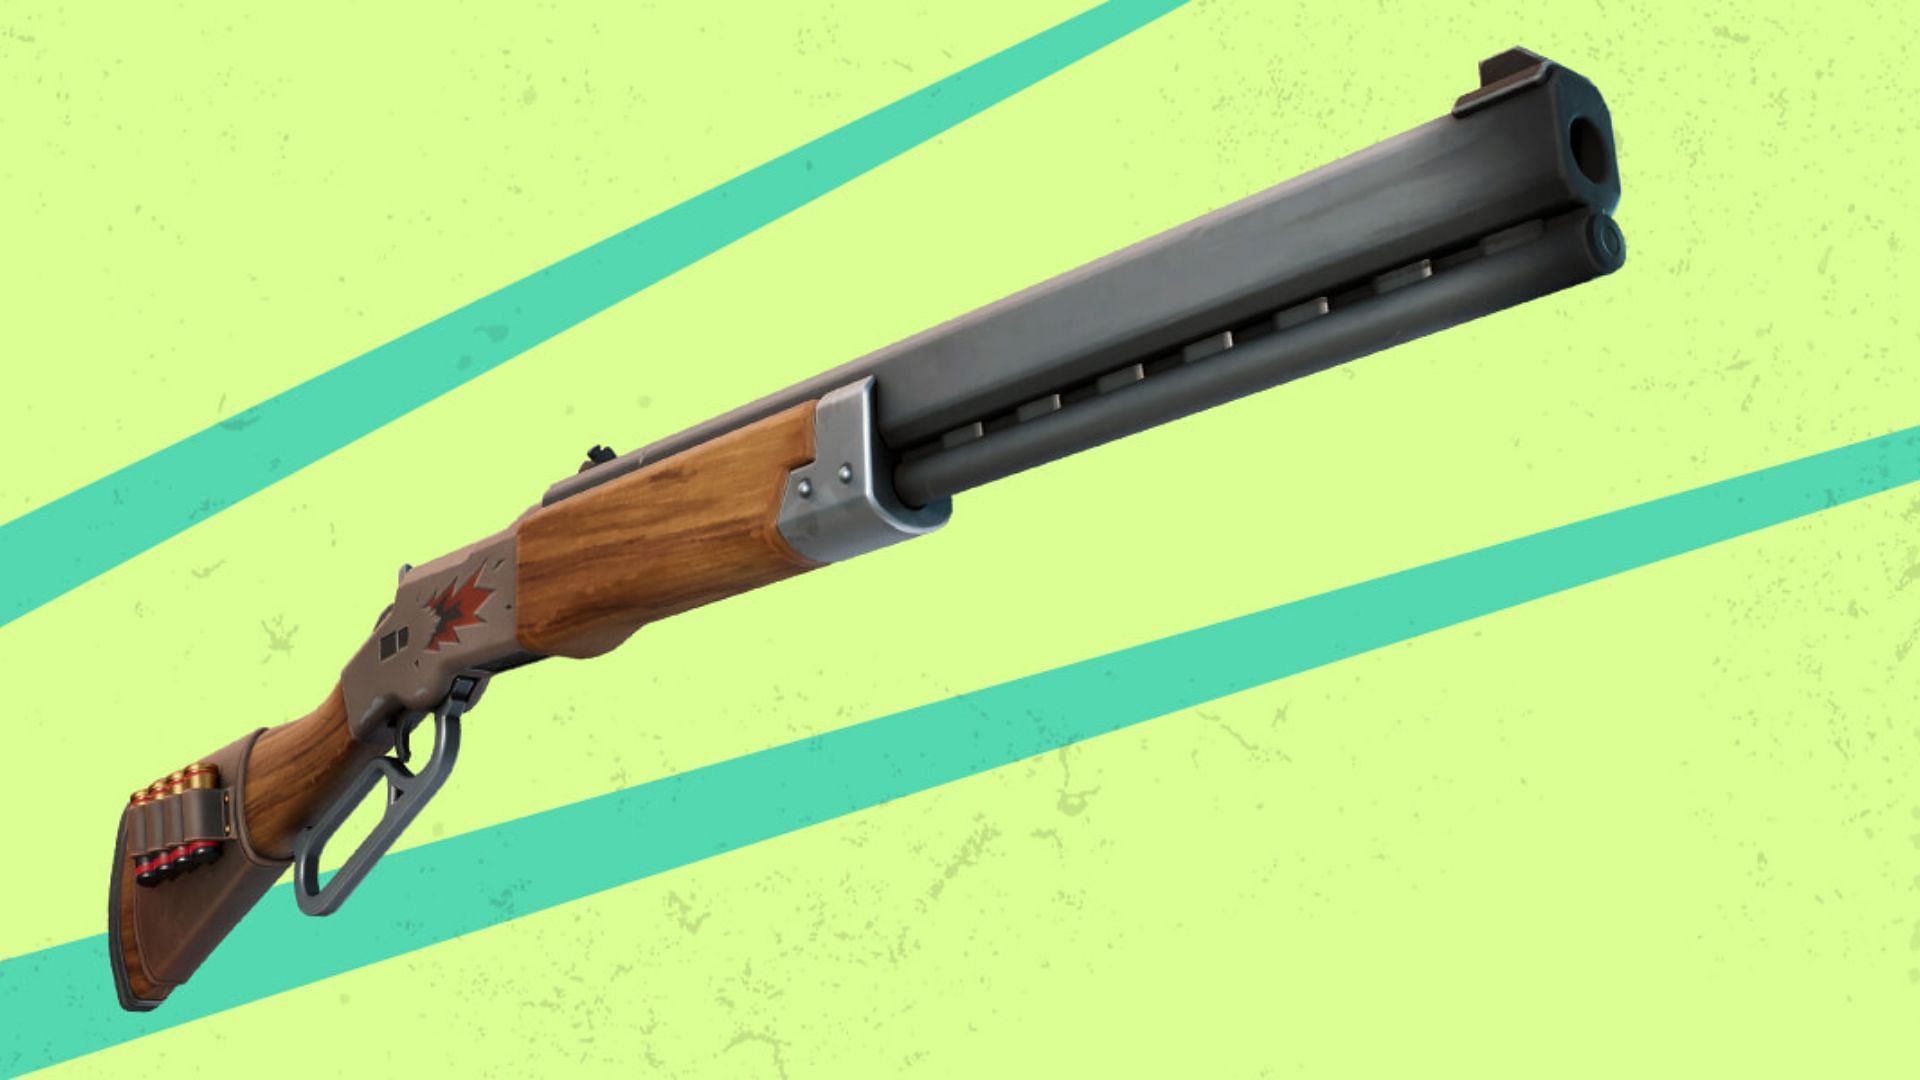 The new Explosive Repeater Rifle in Fortnite (Image via Epic Games)